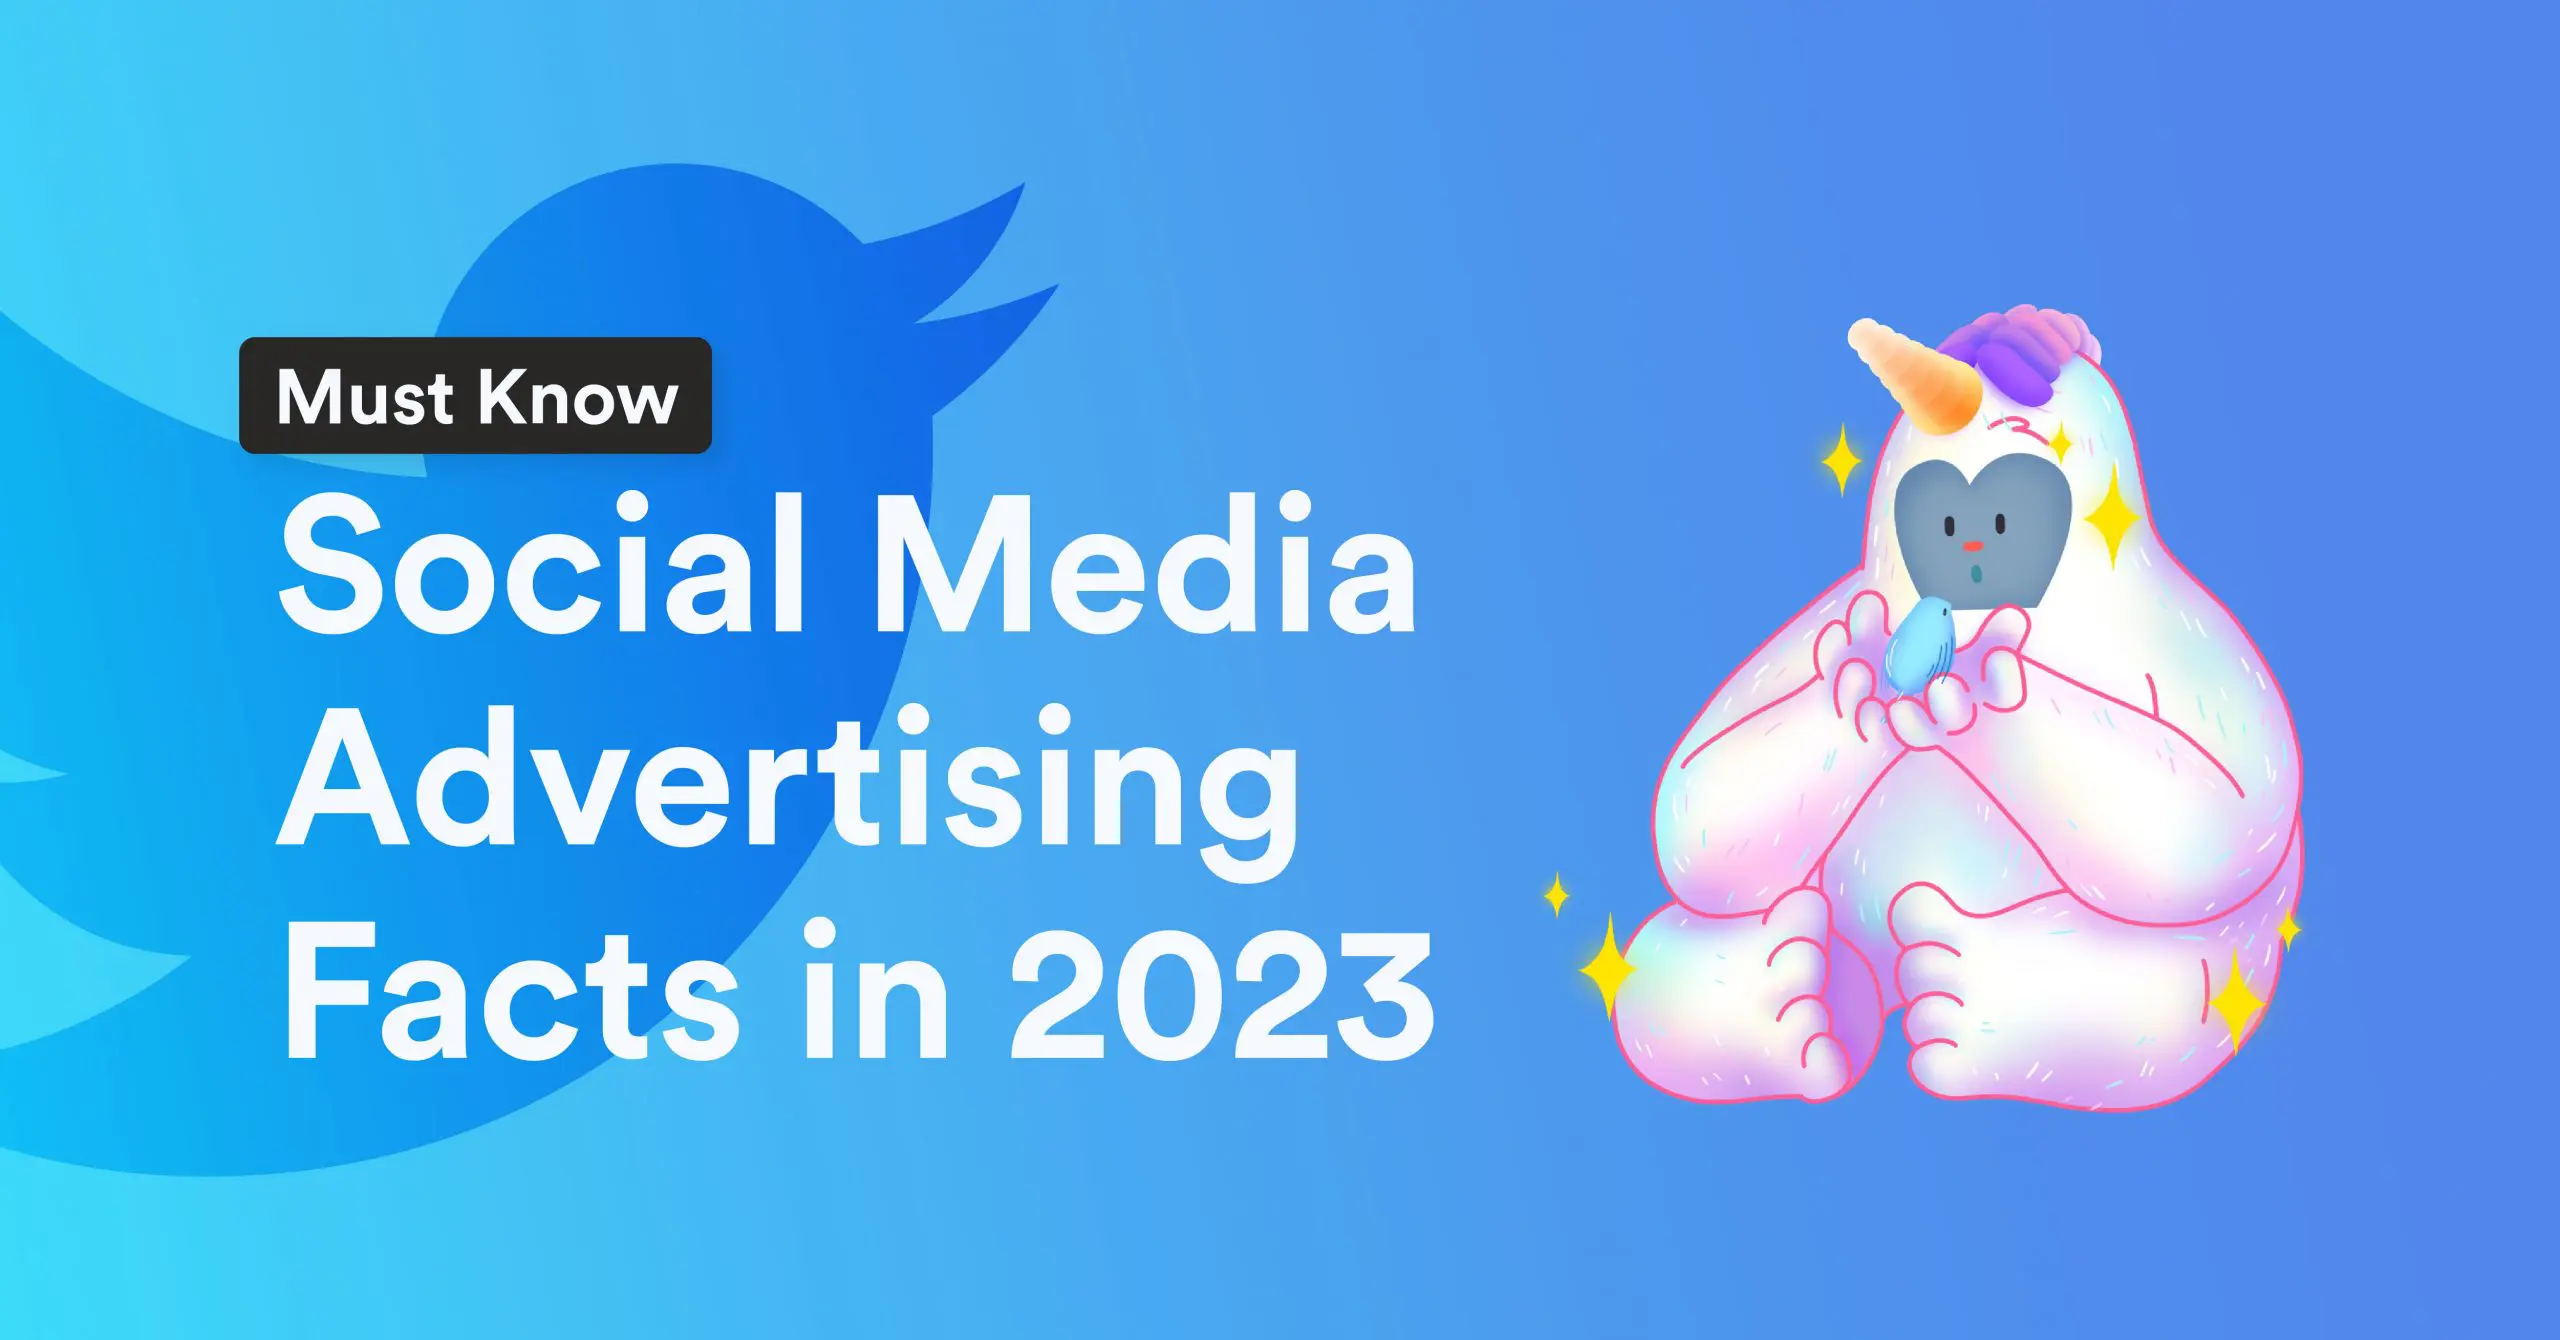 [Twitter] Must Know Social Media Advertising Facts in 2023